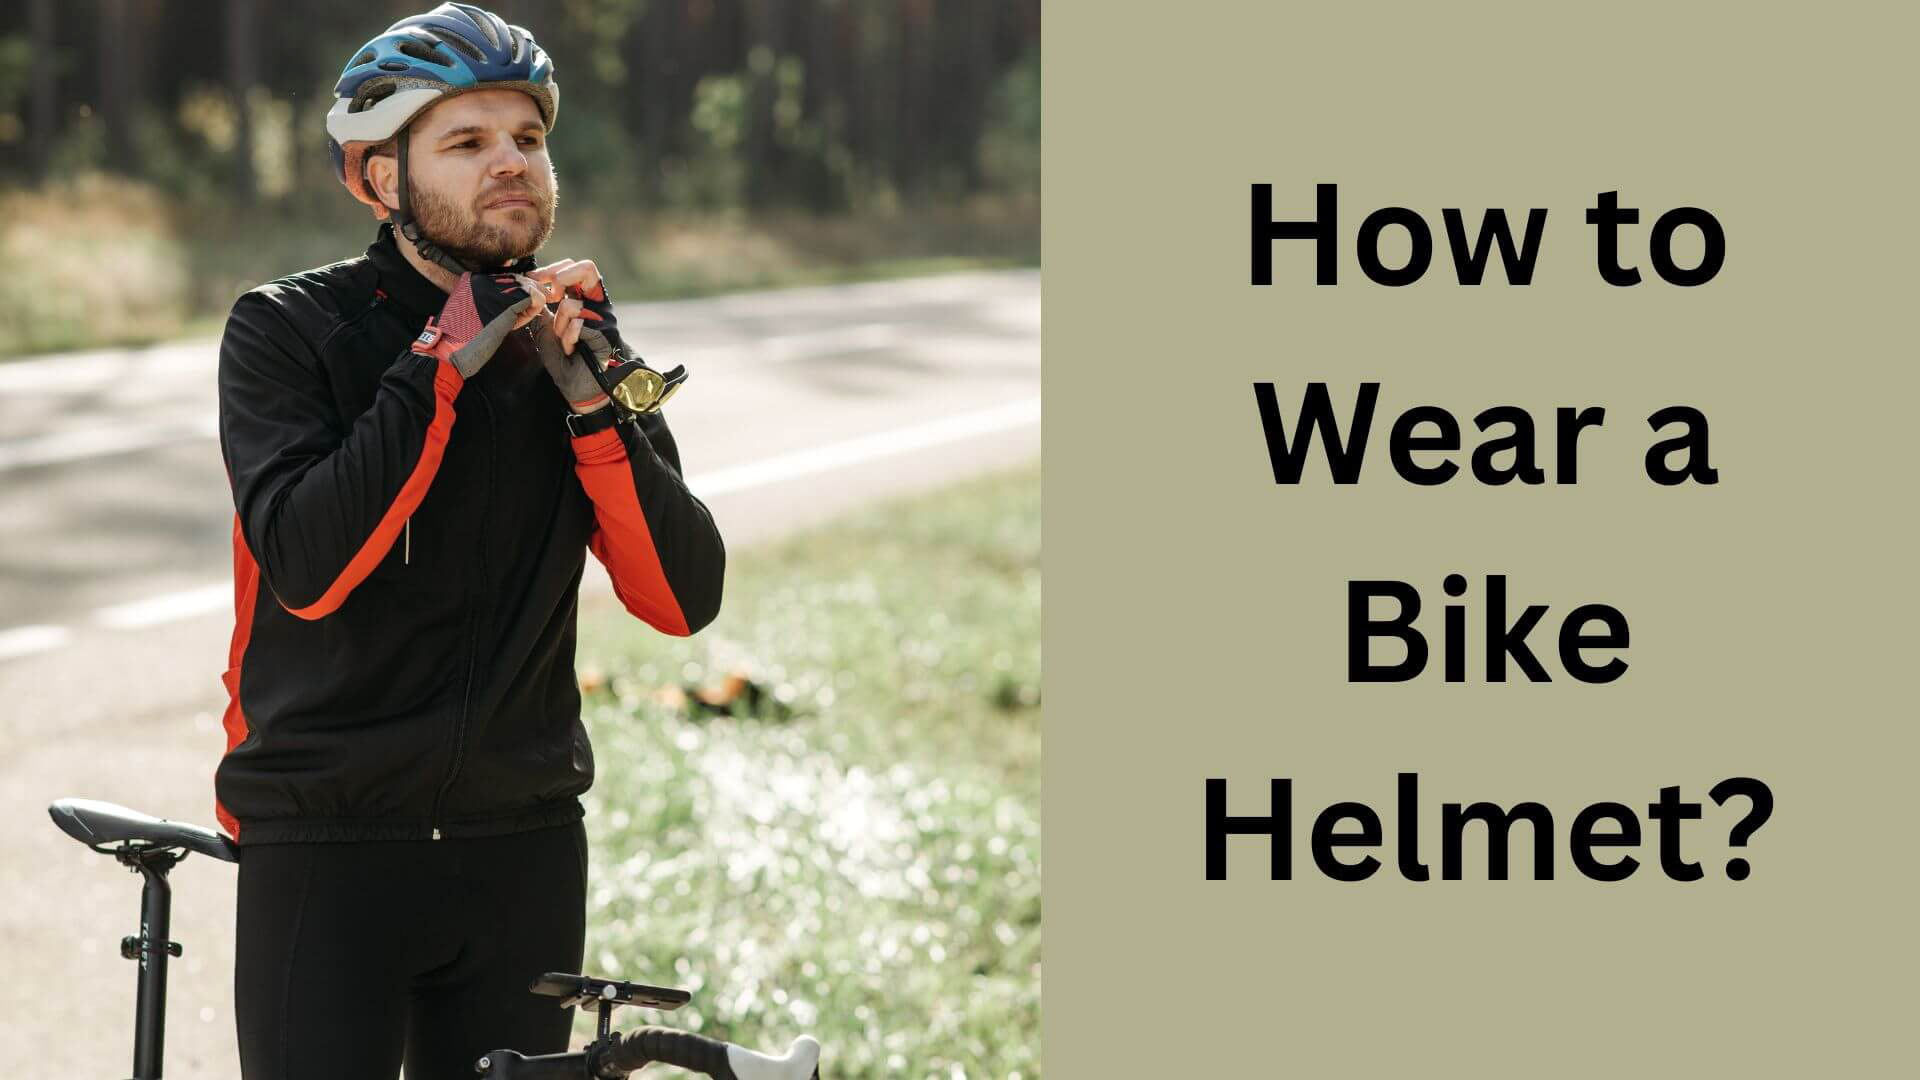 How to Wear a Bike Helmet? Safely and Properly